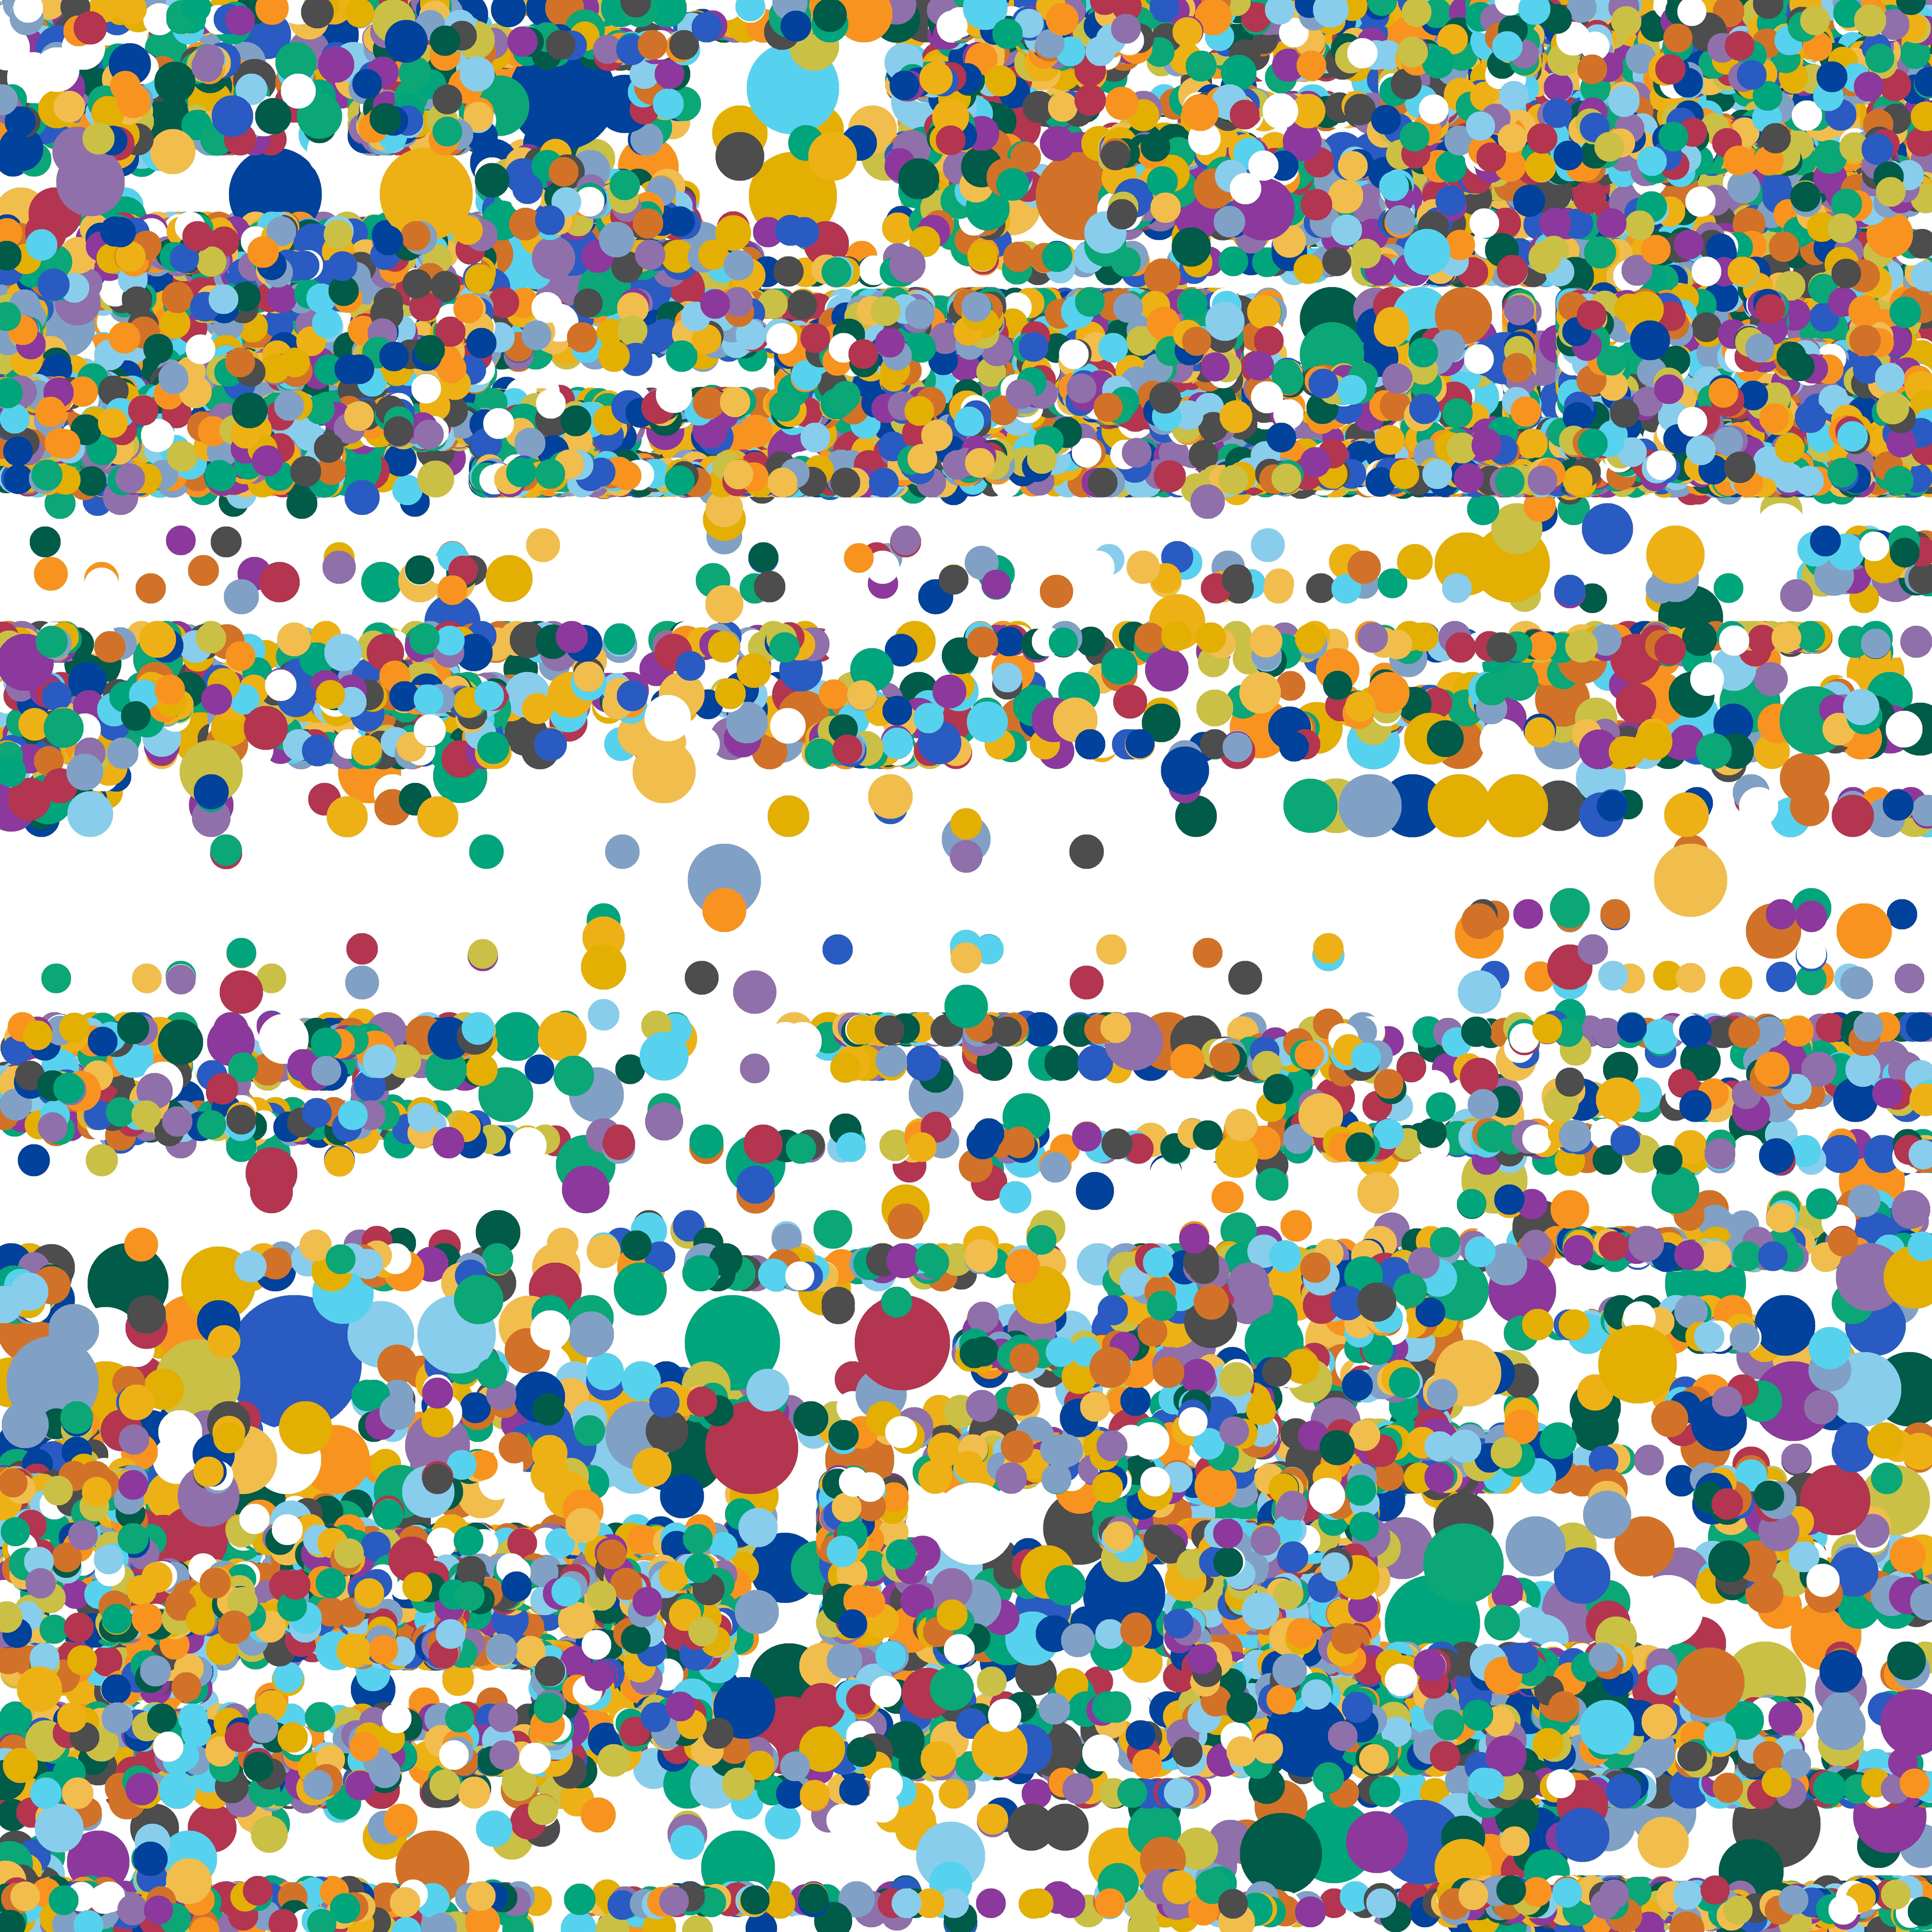 'Bitcoin Bright All-Time-High’ - 1/1 Abstract NFT Art - MooniTooki Project – @6480 x 6480 pixels - 2022 NFT Release #3